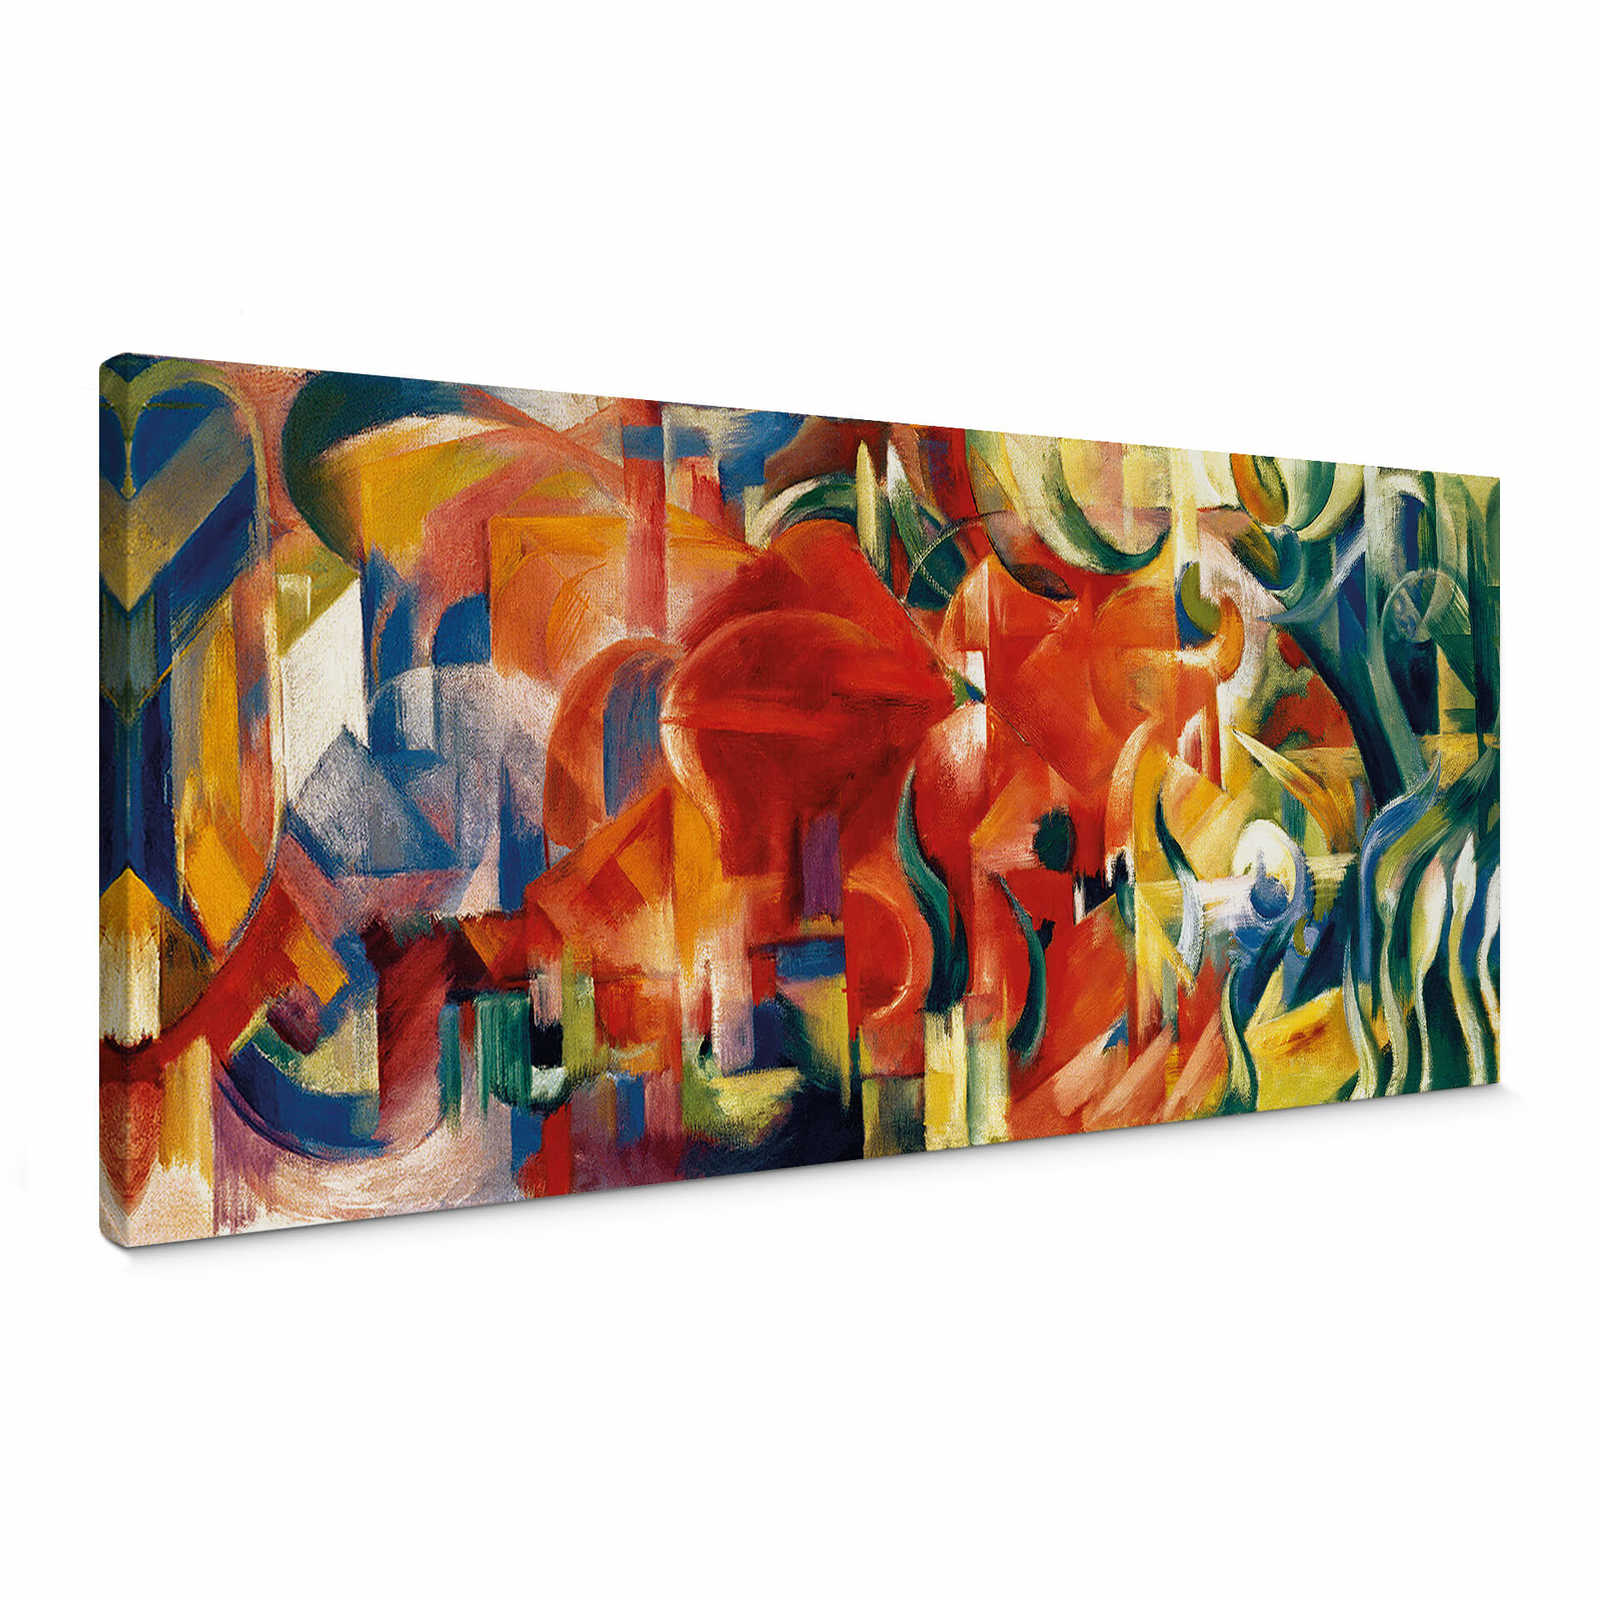 Panorama canvas print "Playing shapes" by Franz Marc
